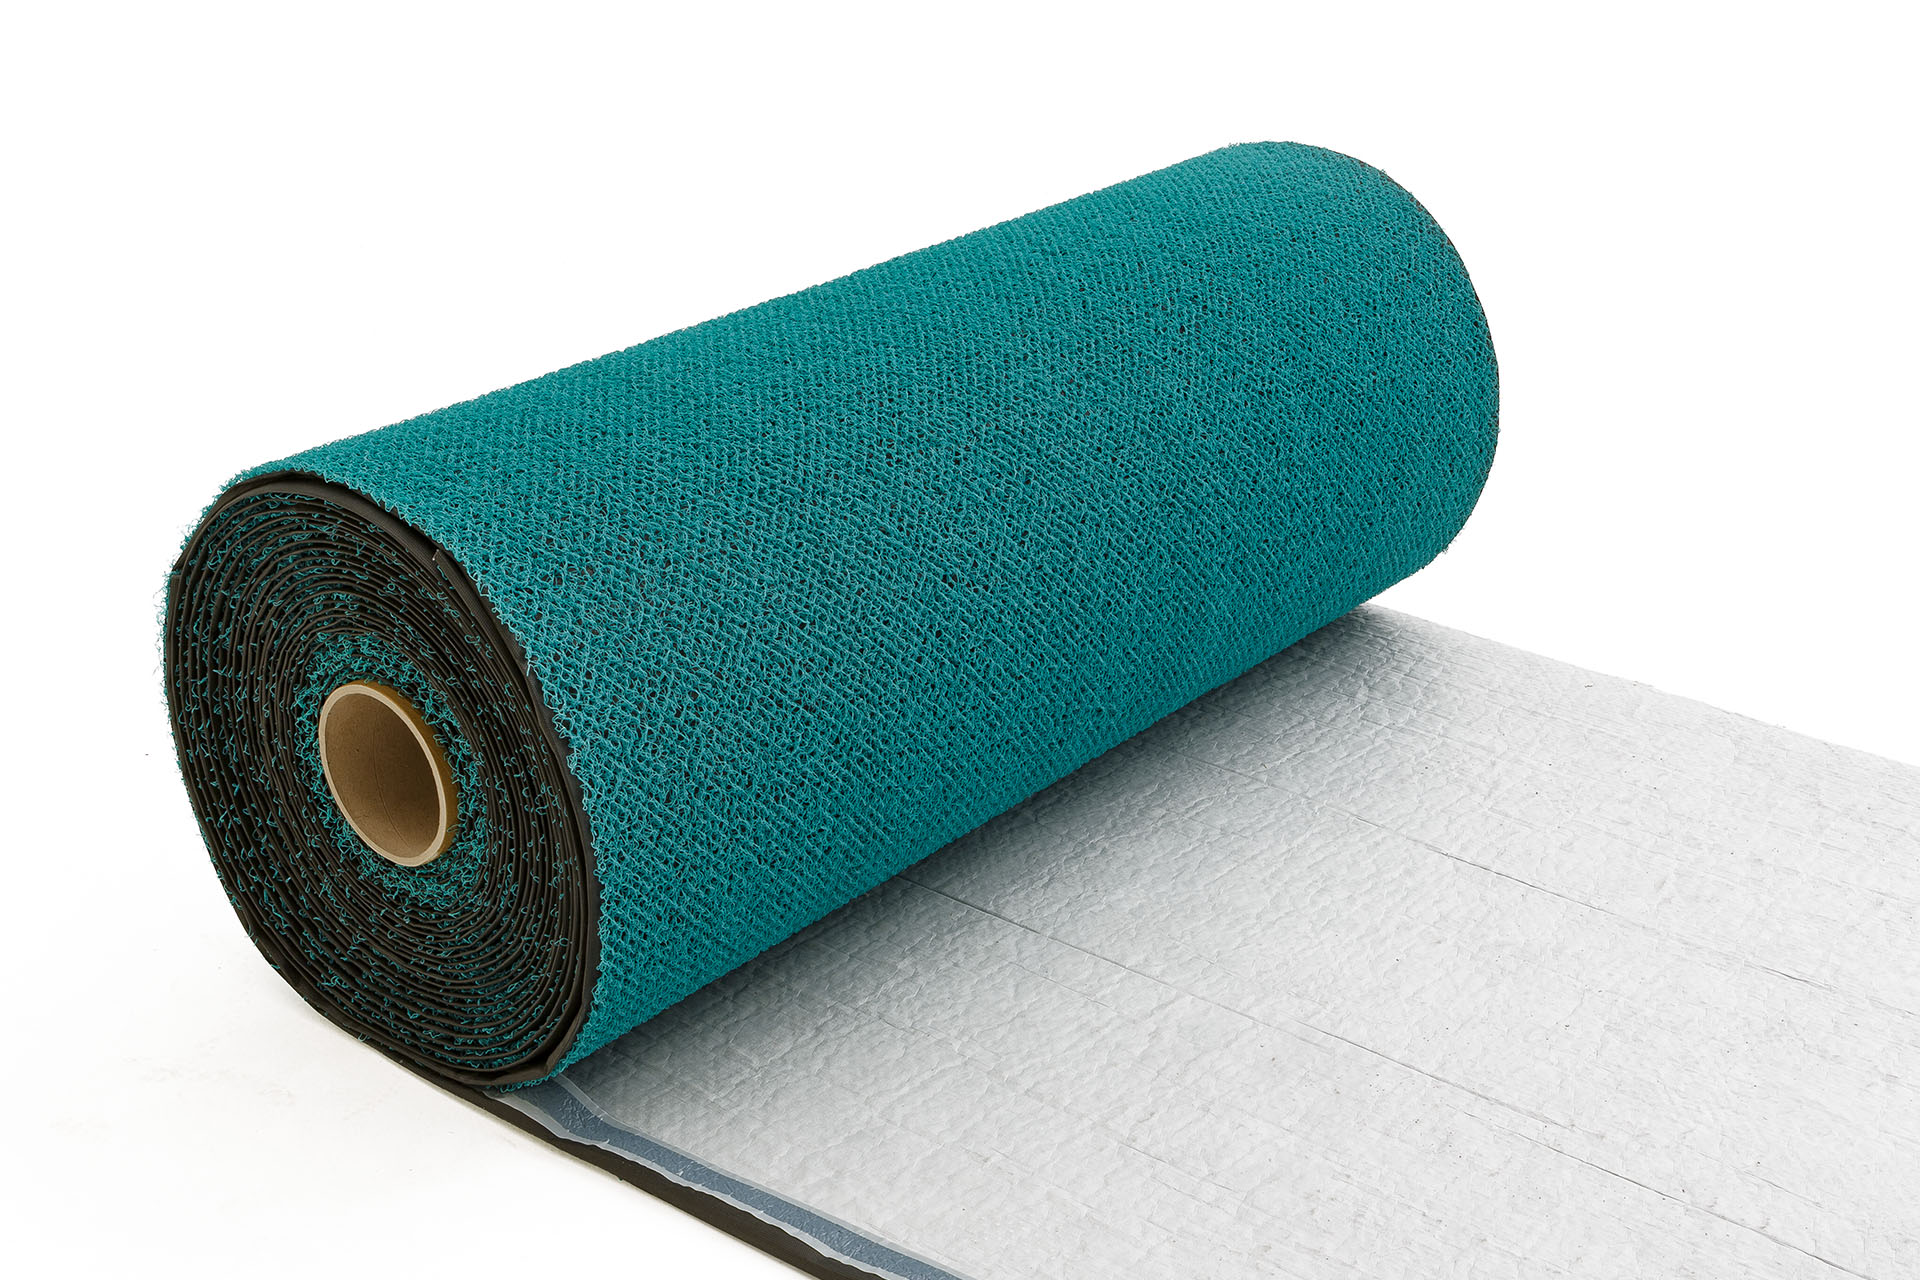 Acoustic insulation roll